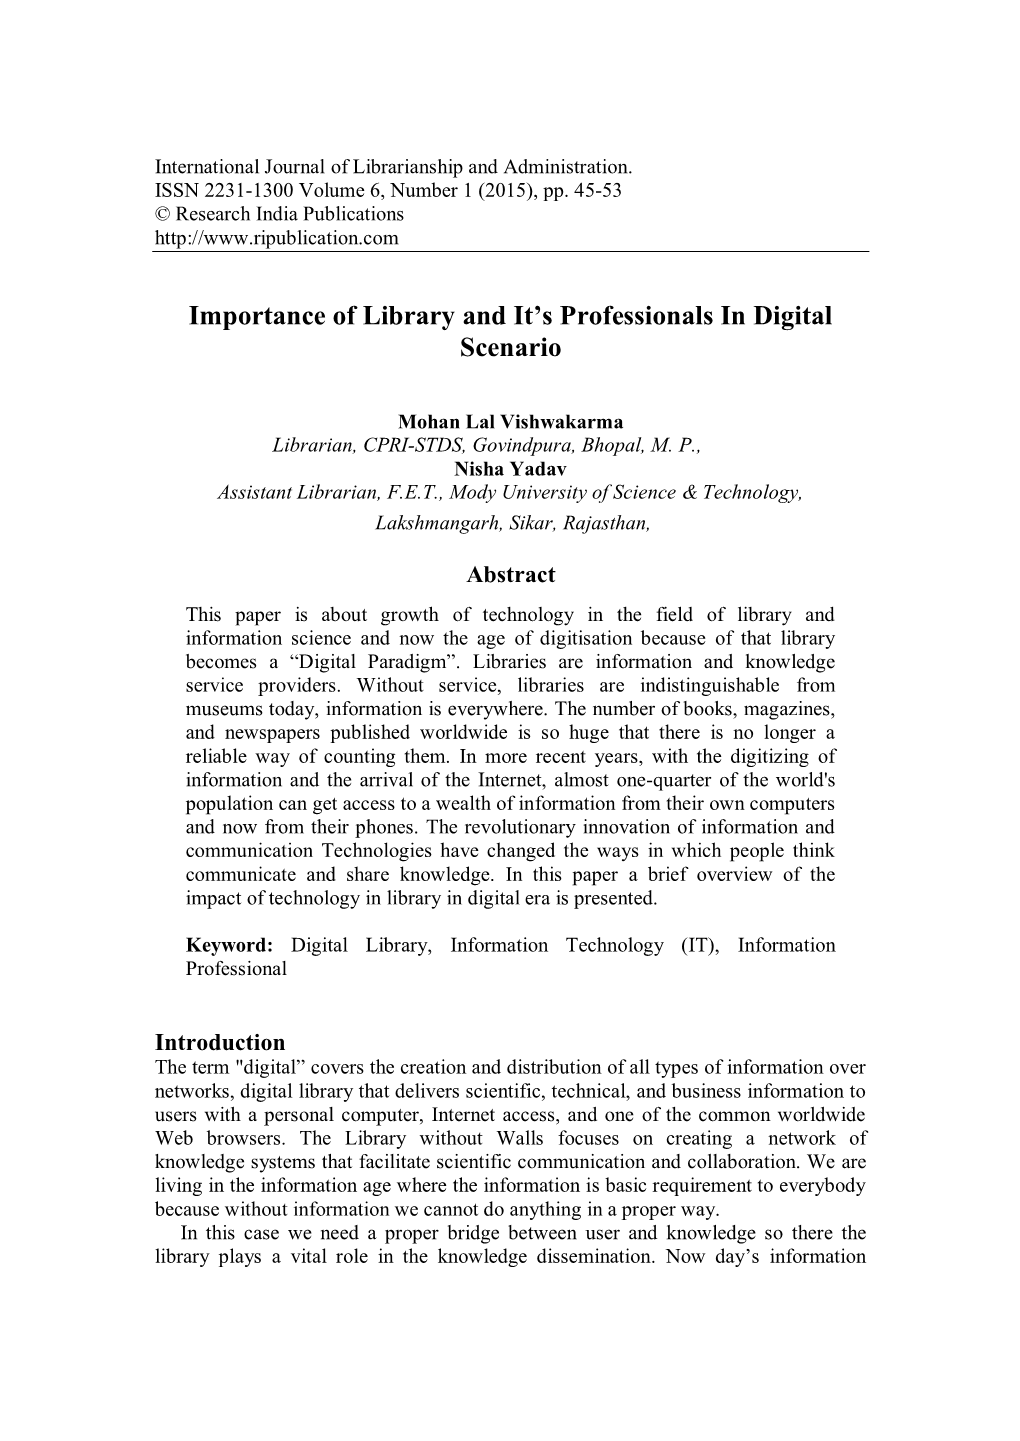 Importance of Library and It's Professionals in Digital Scenario